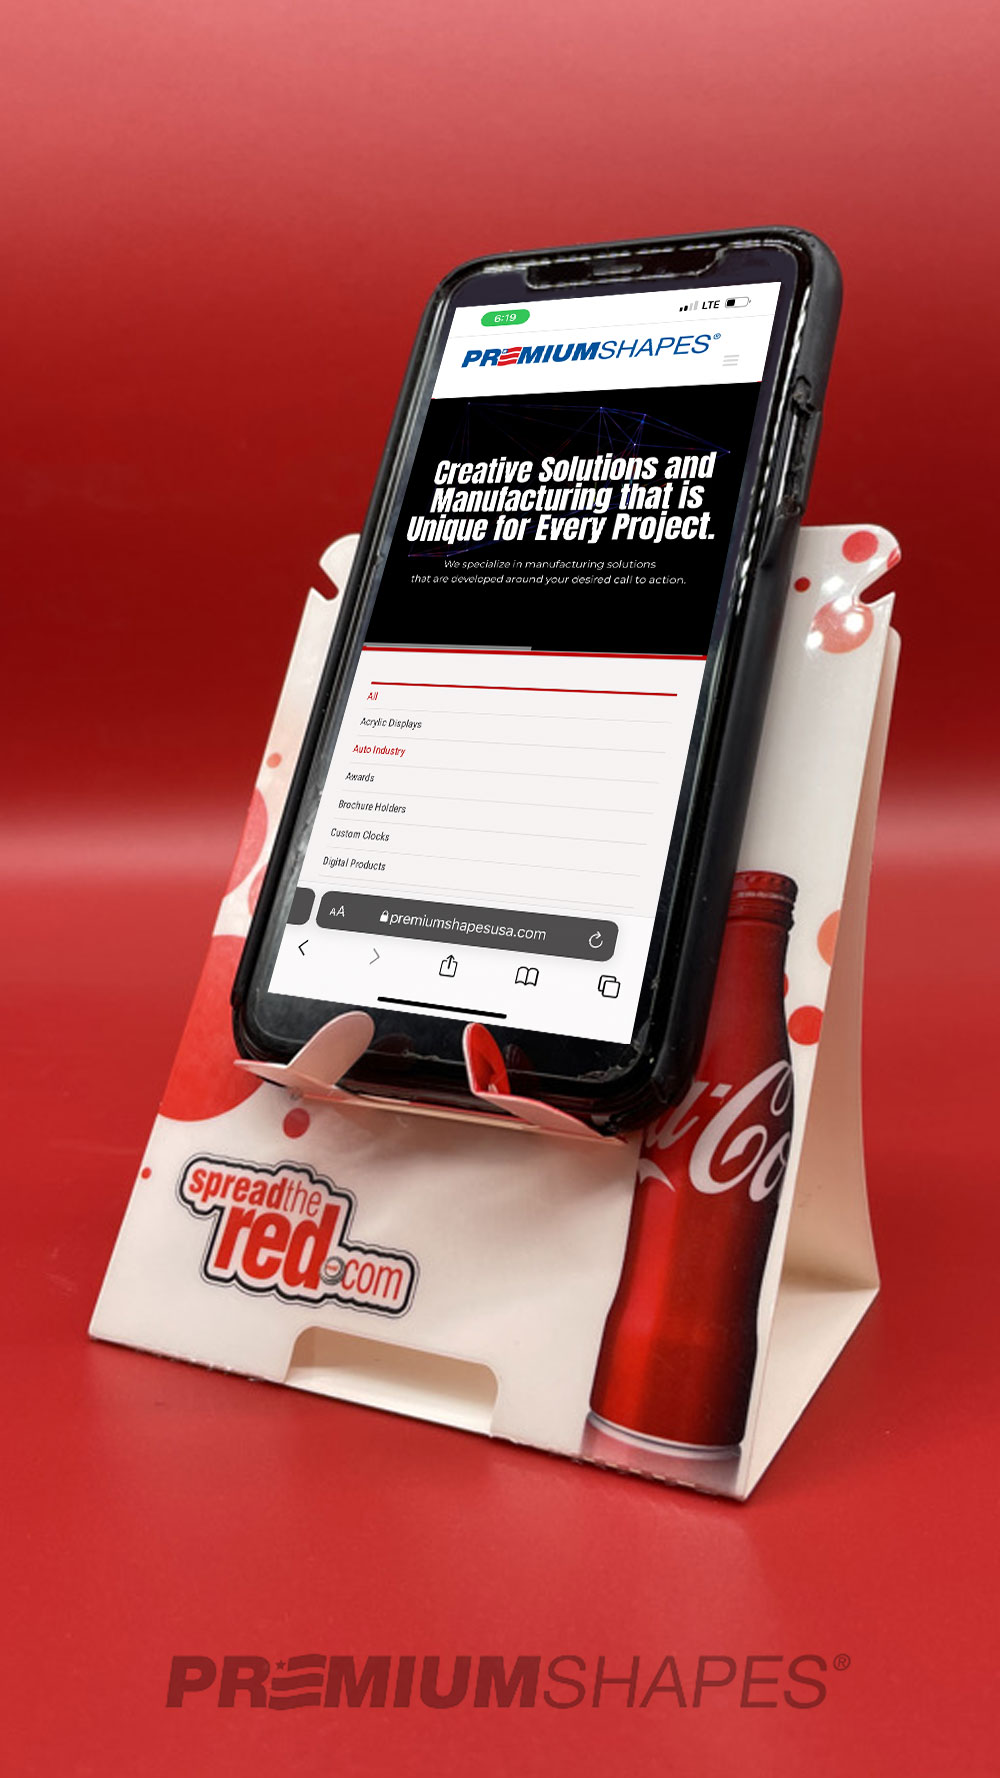 Coke PDA holder shown with phone